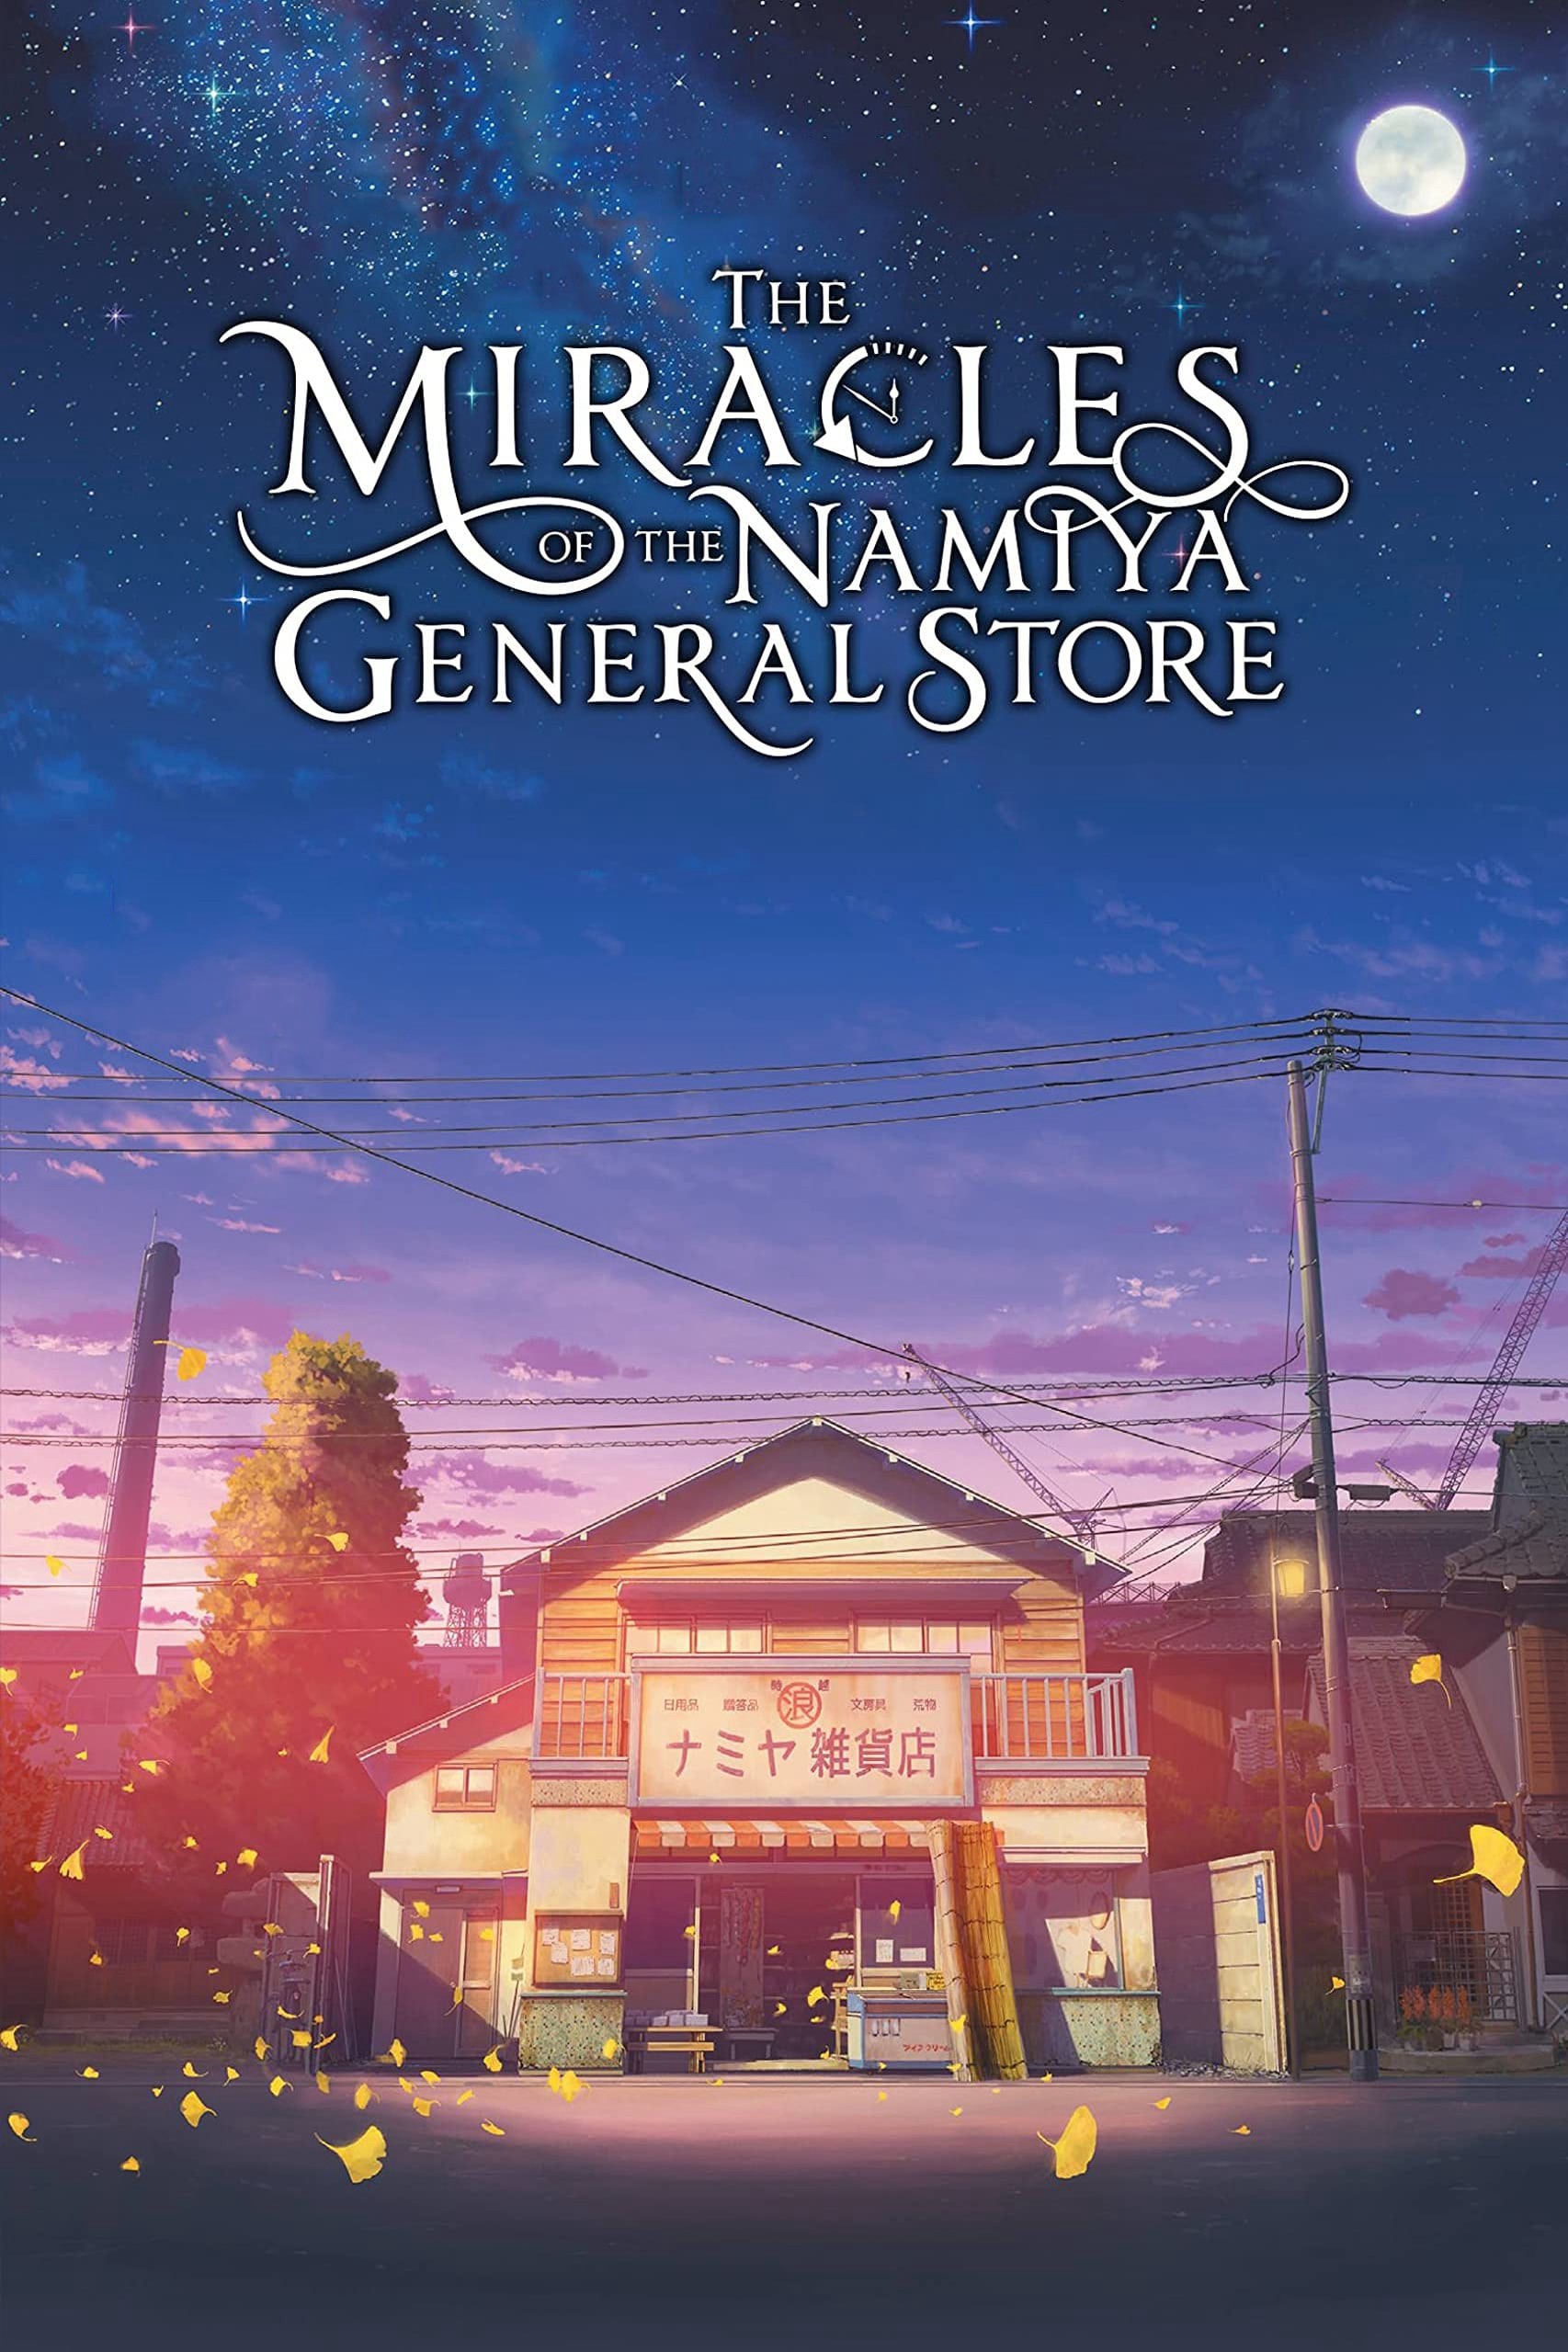 The Miracles of the Namiya General Store (The Miracles of the Namiya General Store) [2017]